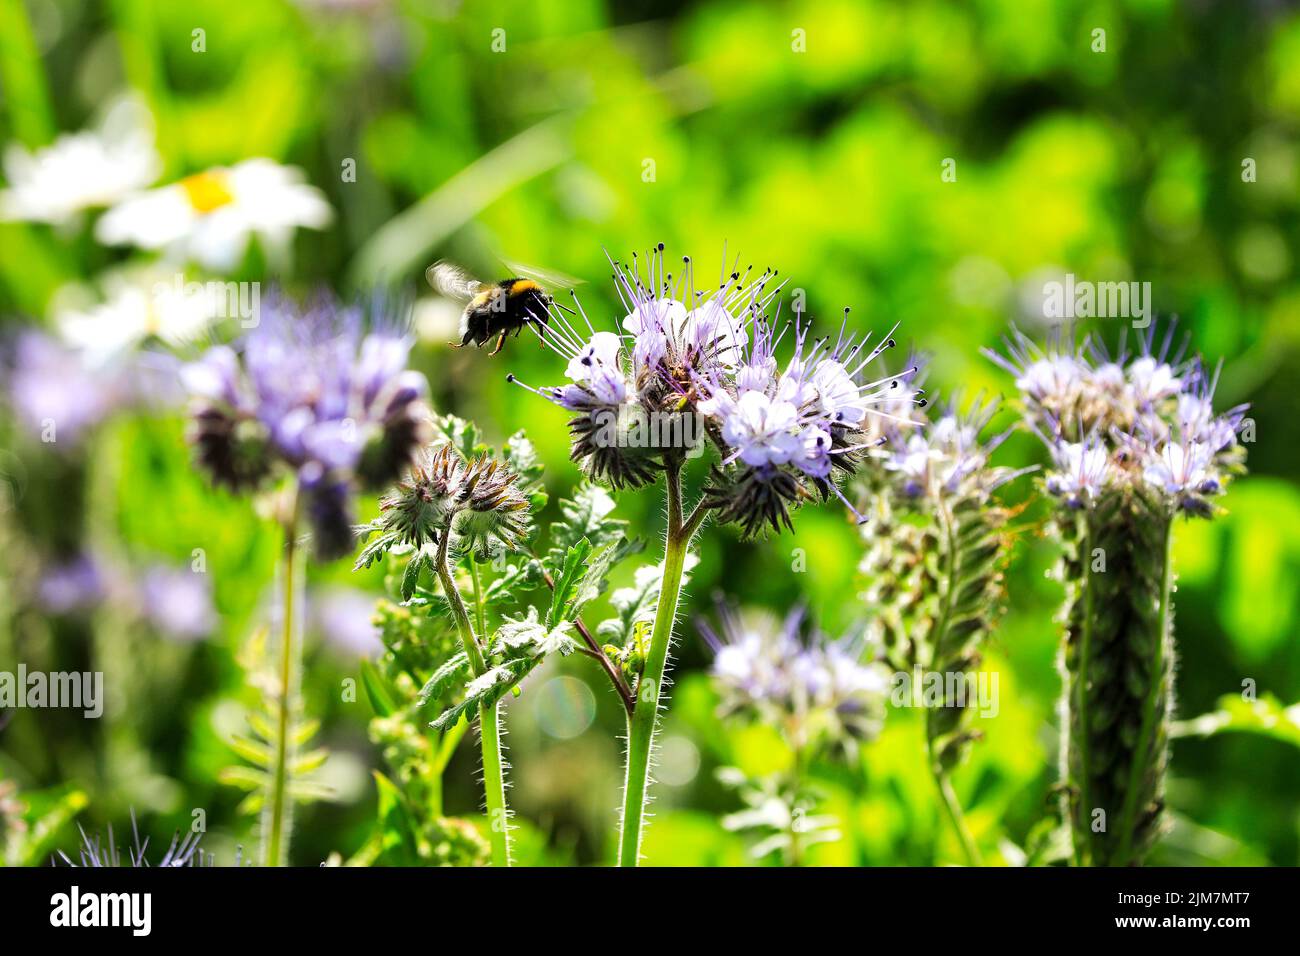 Bumblebee, pollinator insect of Bombus spp, is about to land on flowering Lacy phacelia, Phacelia tanacetifolia, for feeding on its nectar. Shallow do Stock Photo